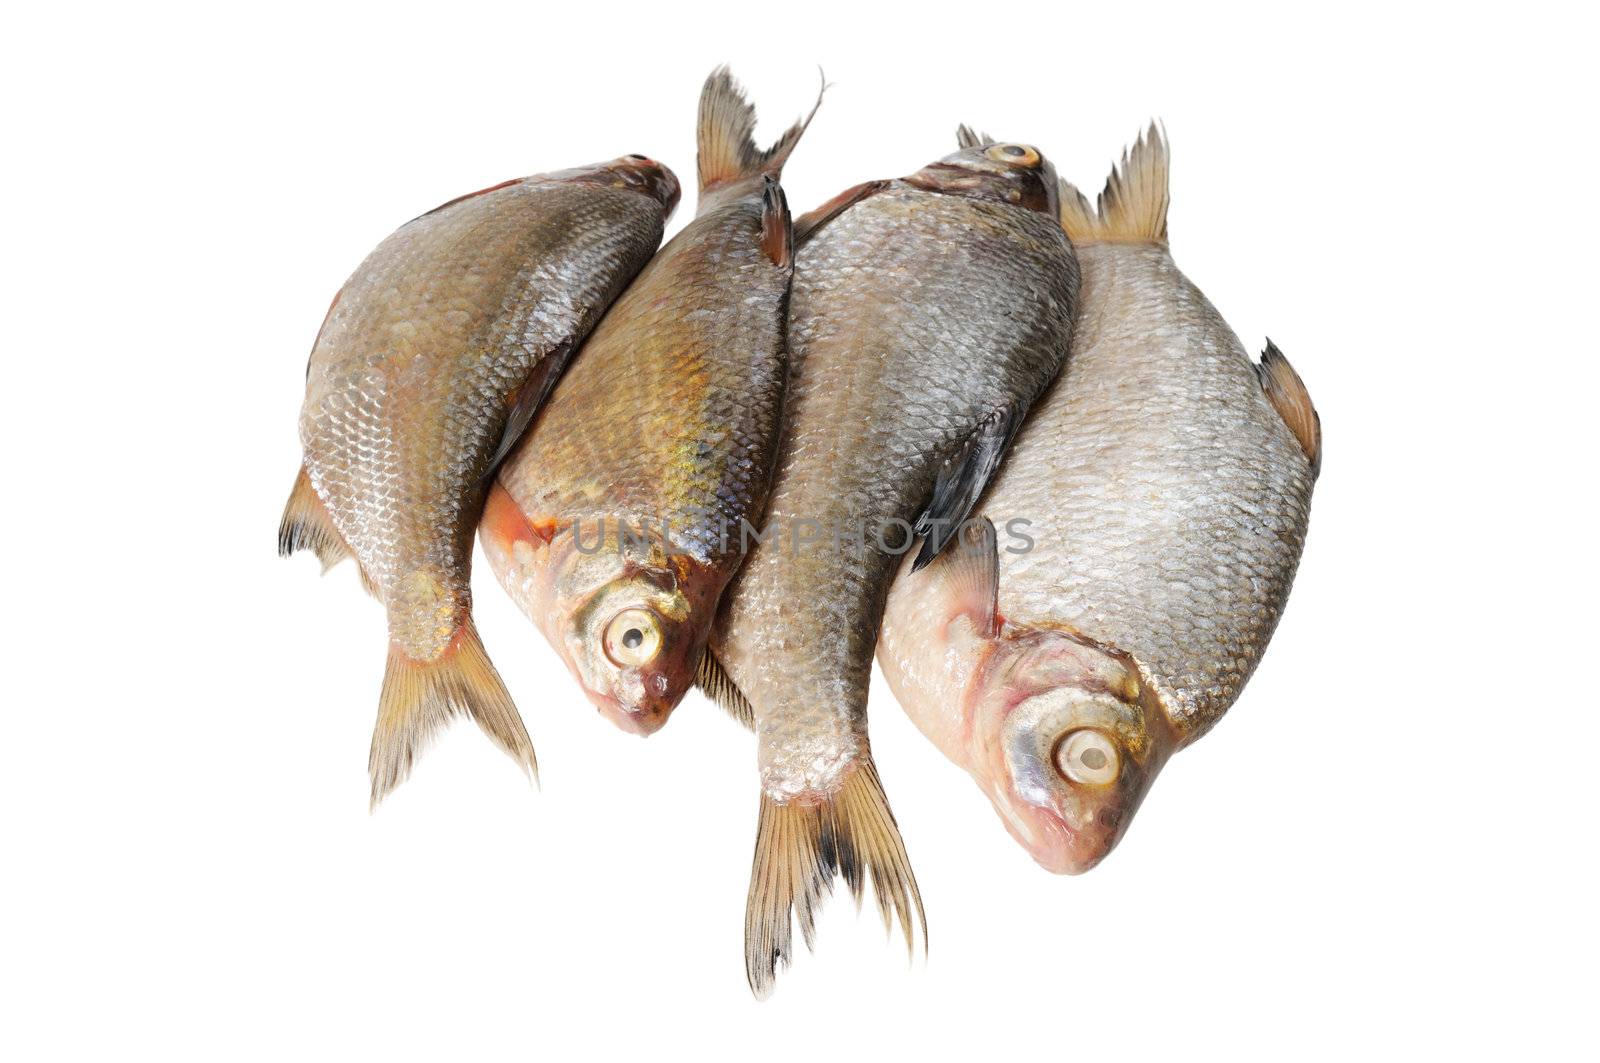 Several fresh freshwater fish. Bream and roach. Isolated on white.